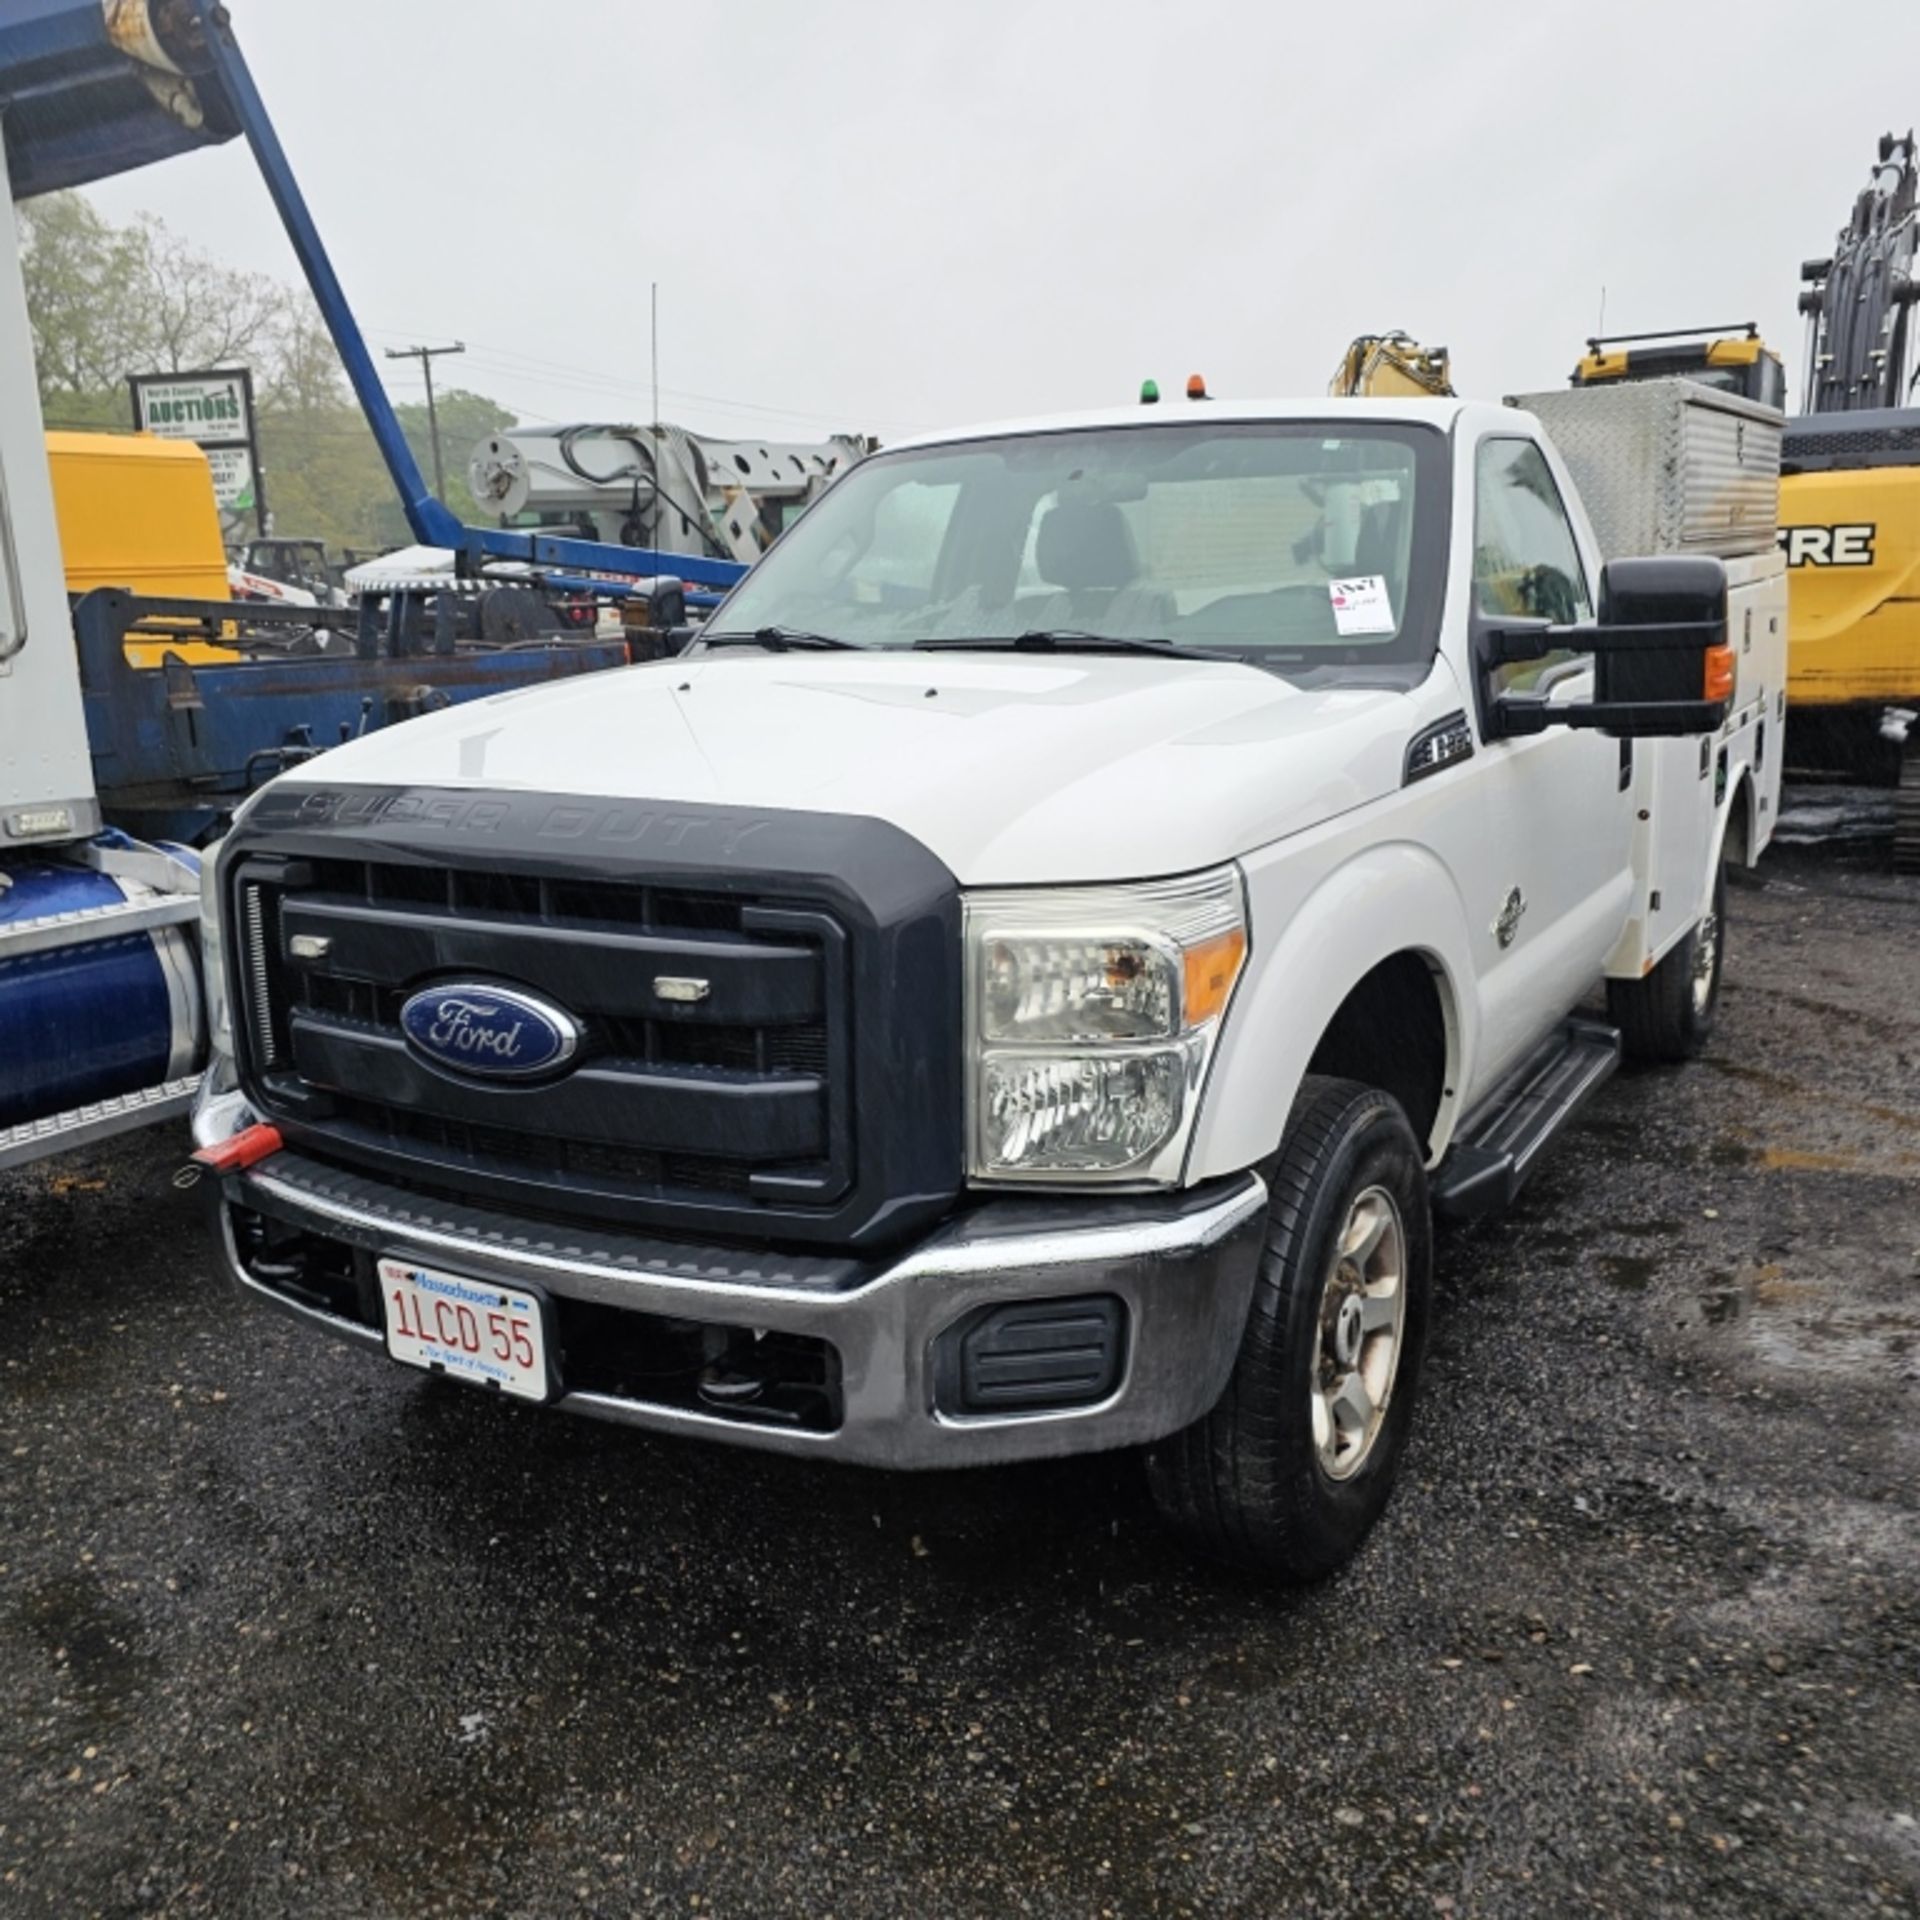 2013 Ford F250 Service Truck - Image 2 of 8